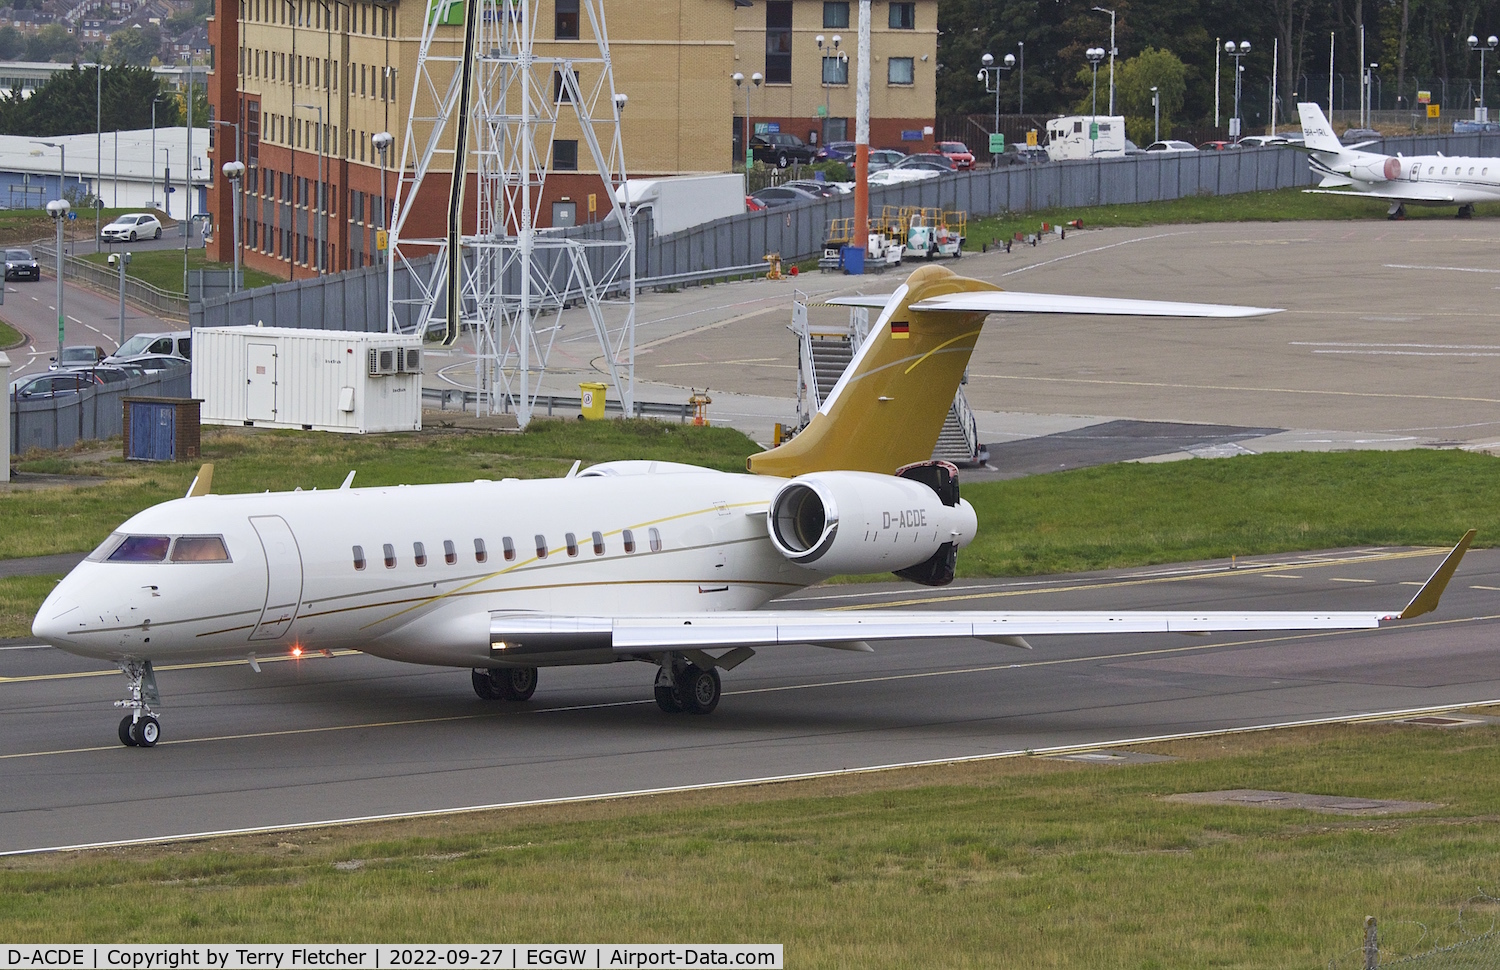 D-ACDE, 2010 Bombardier BD-700-1A11 Global Express C/N 9405, At Luton